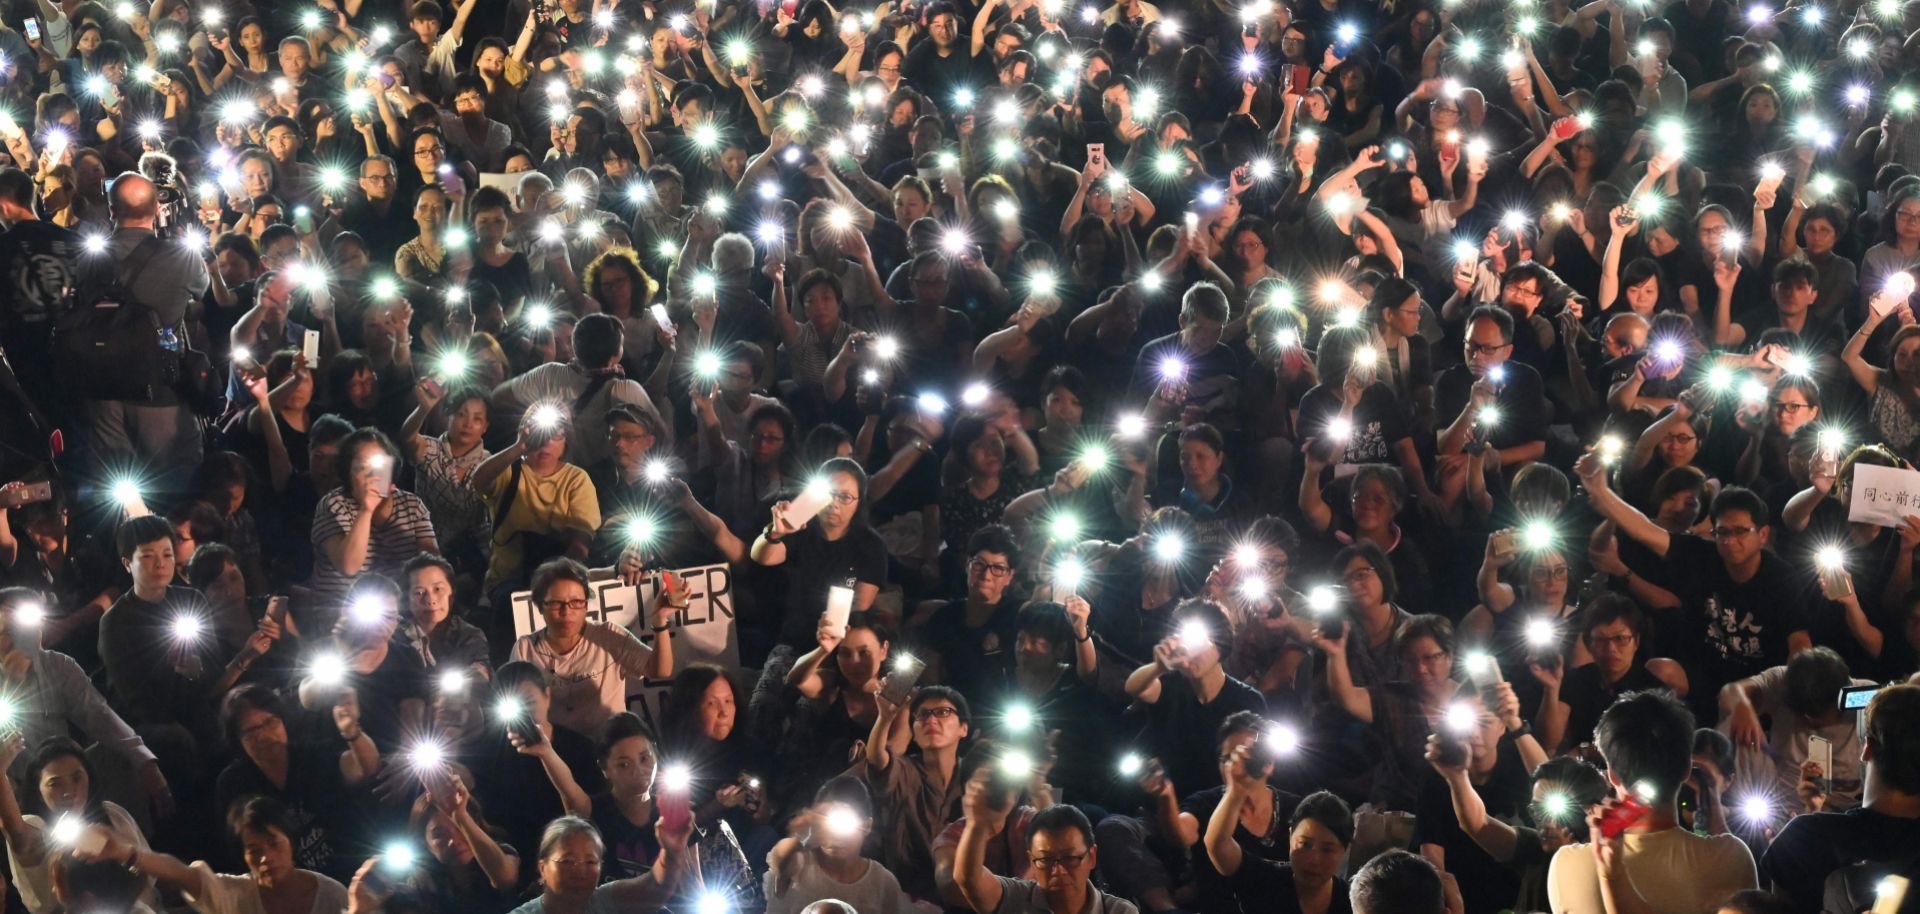 Protesters hold up their lighted phones during a July 5, 2019, rally in Hong Kong.